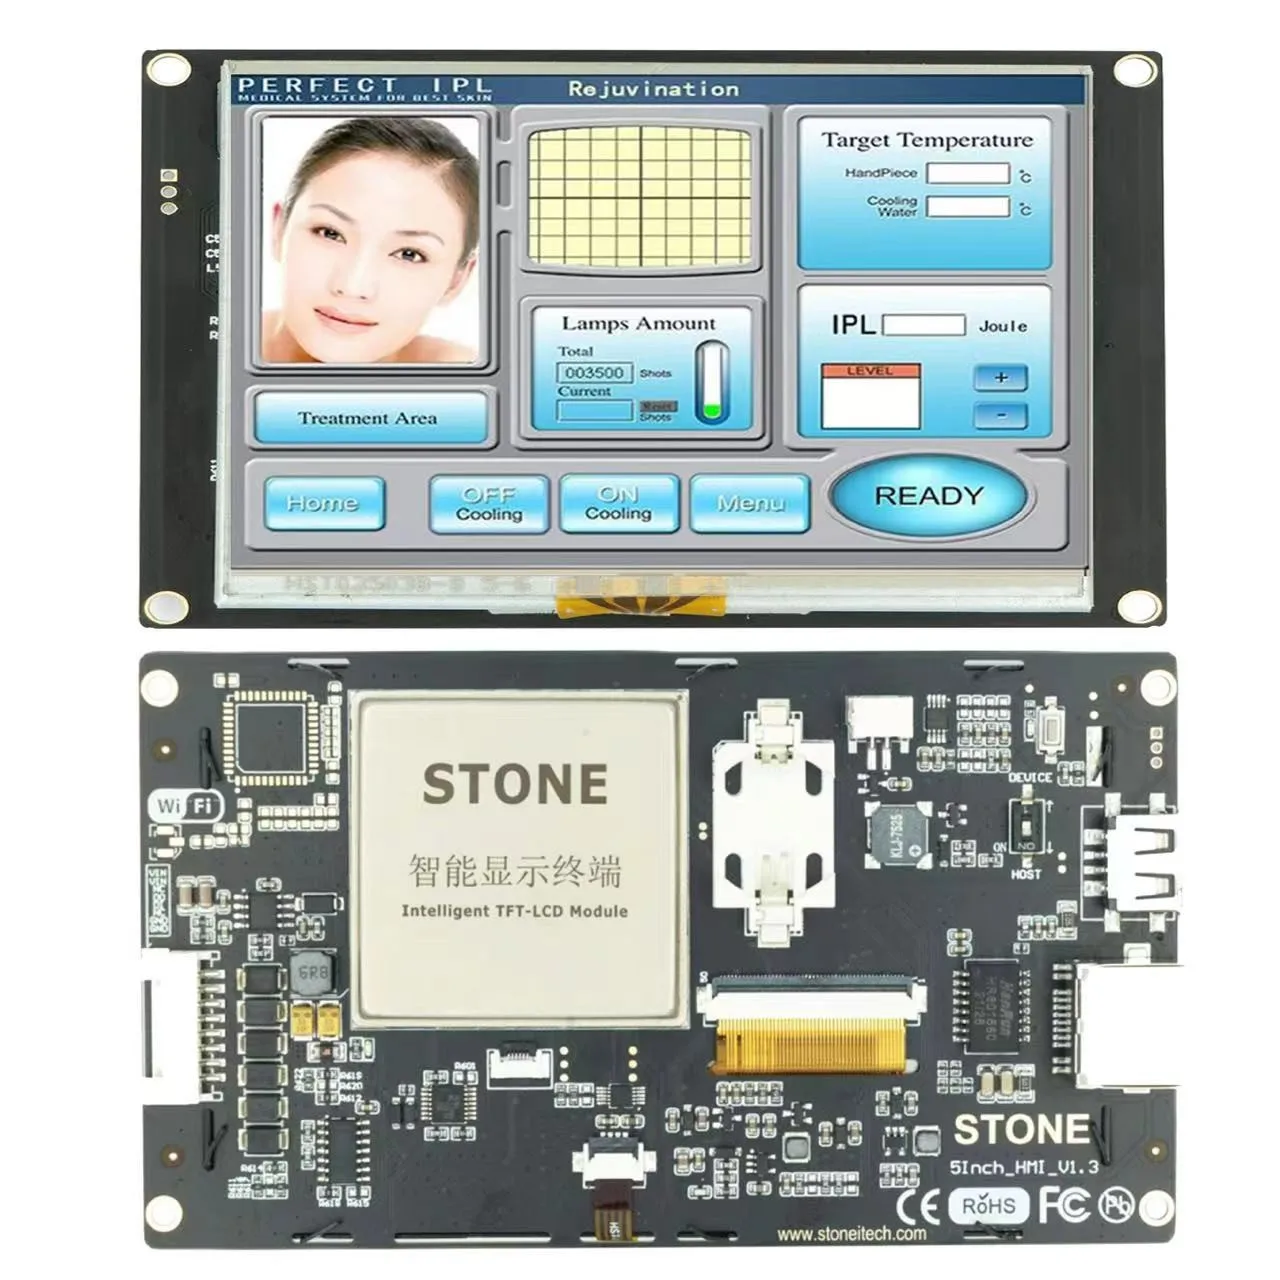 SCBRHMI 5 Inch LCD-TFT HMI Display Resistive Touch Panel Module Intelligent Series RGB 65K Color with Enclosure